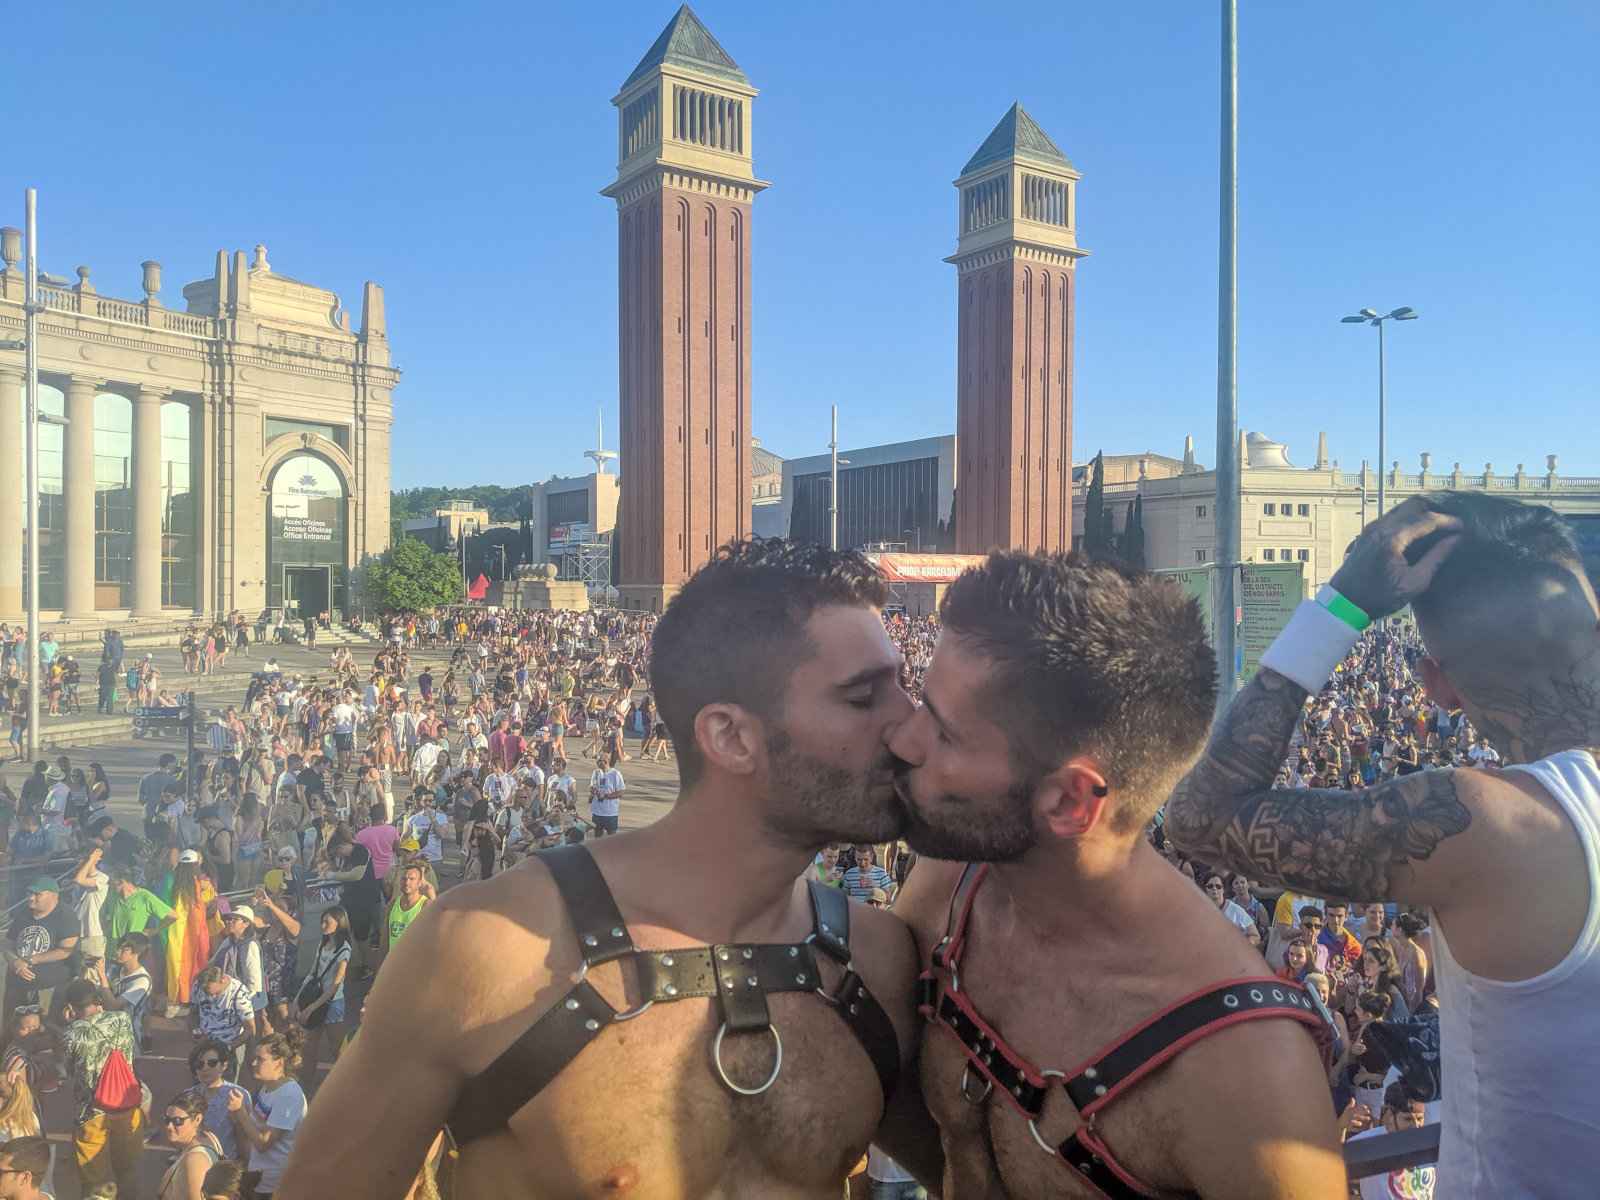 Barcelona Pride makes you feel like you are part of one big LGBTQ family!